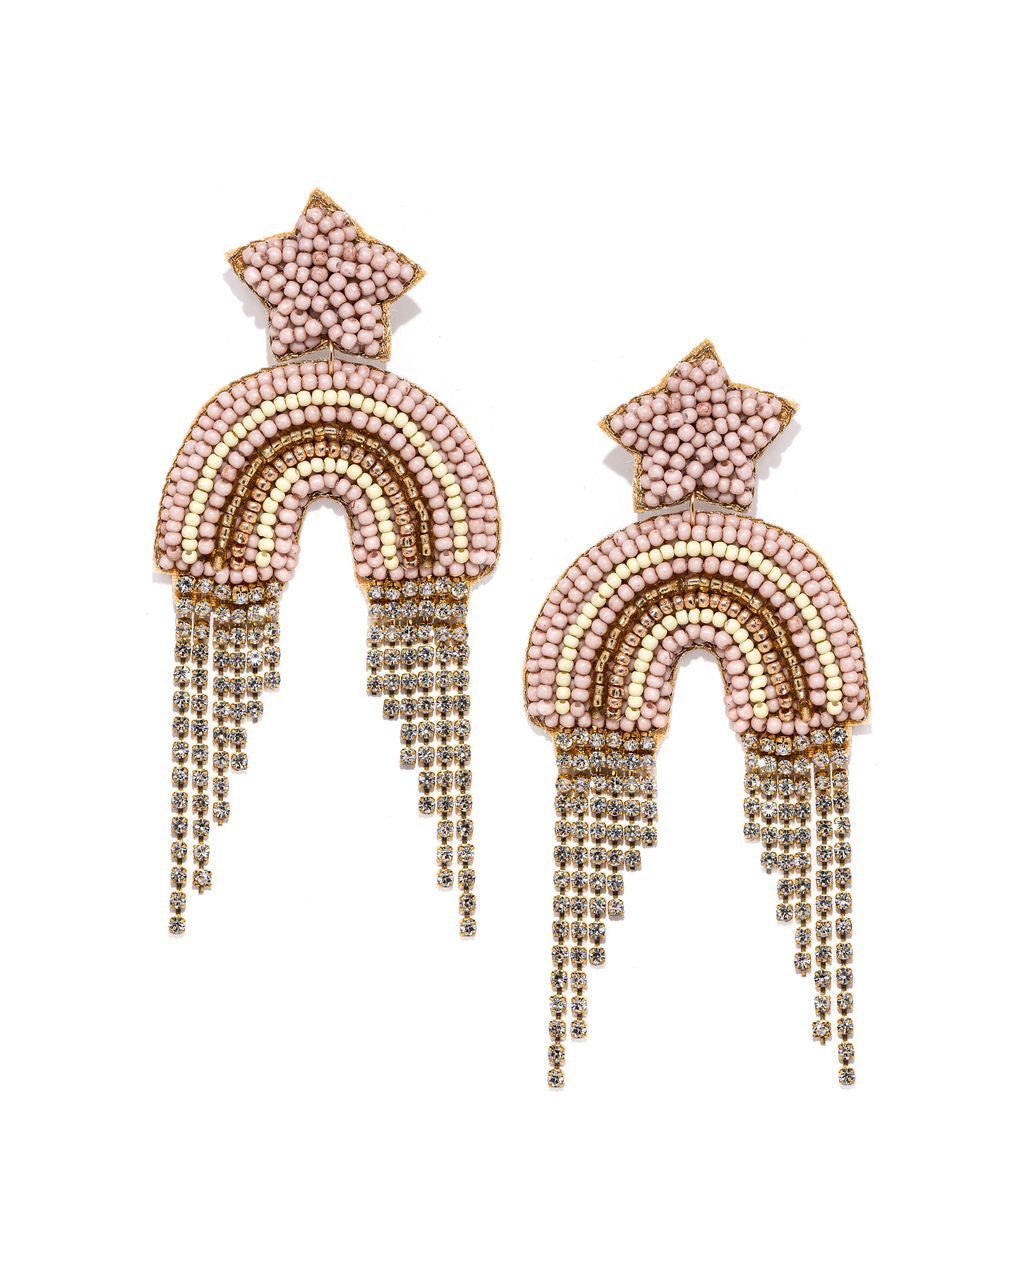 Over The Rainbow Beaded Statement Earrings - Blush Ins Street